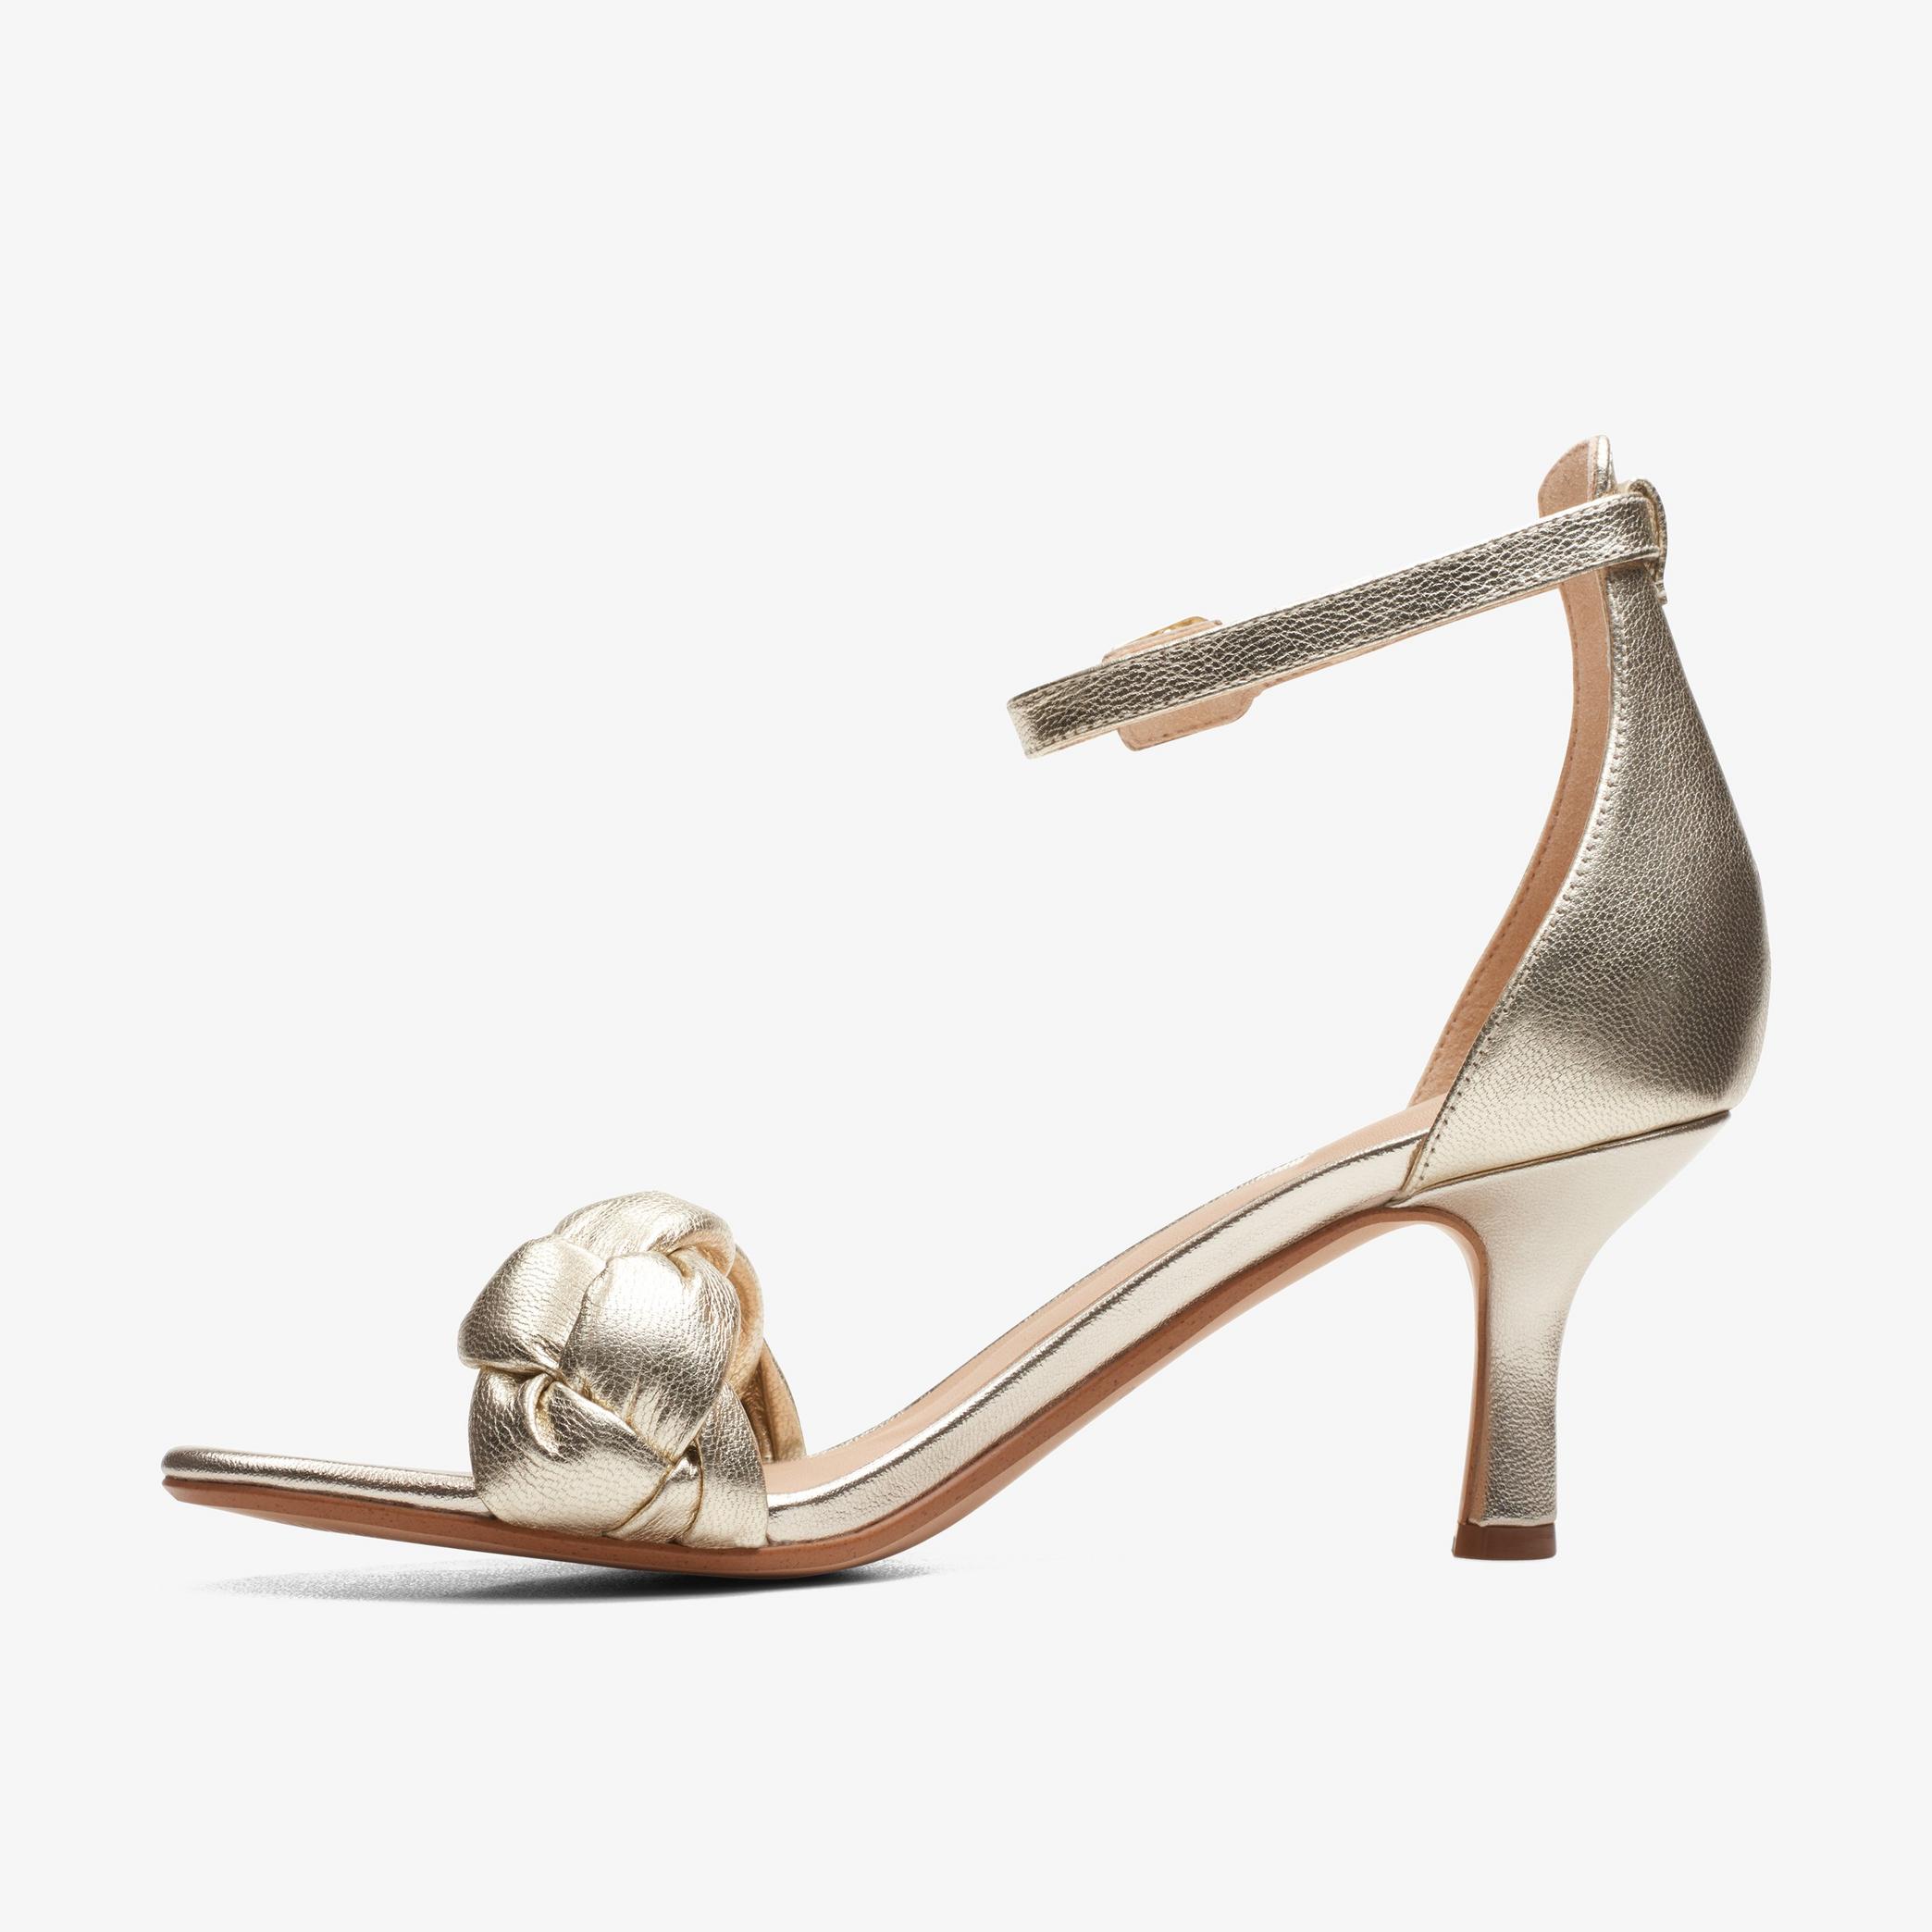 Amali Sandal Champagne Leather Strappy Sandals, view 2 of 6